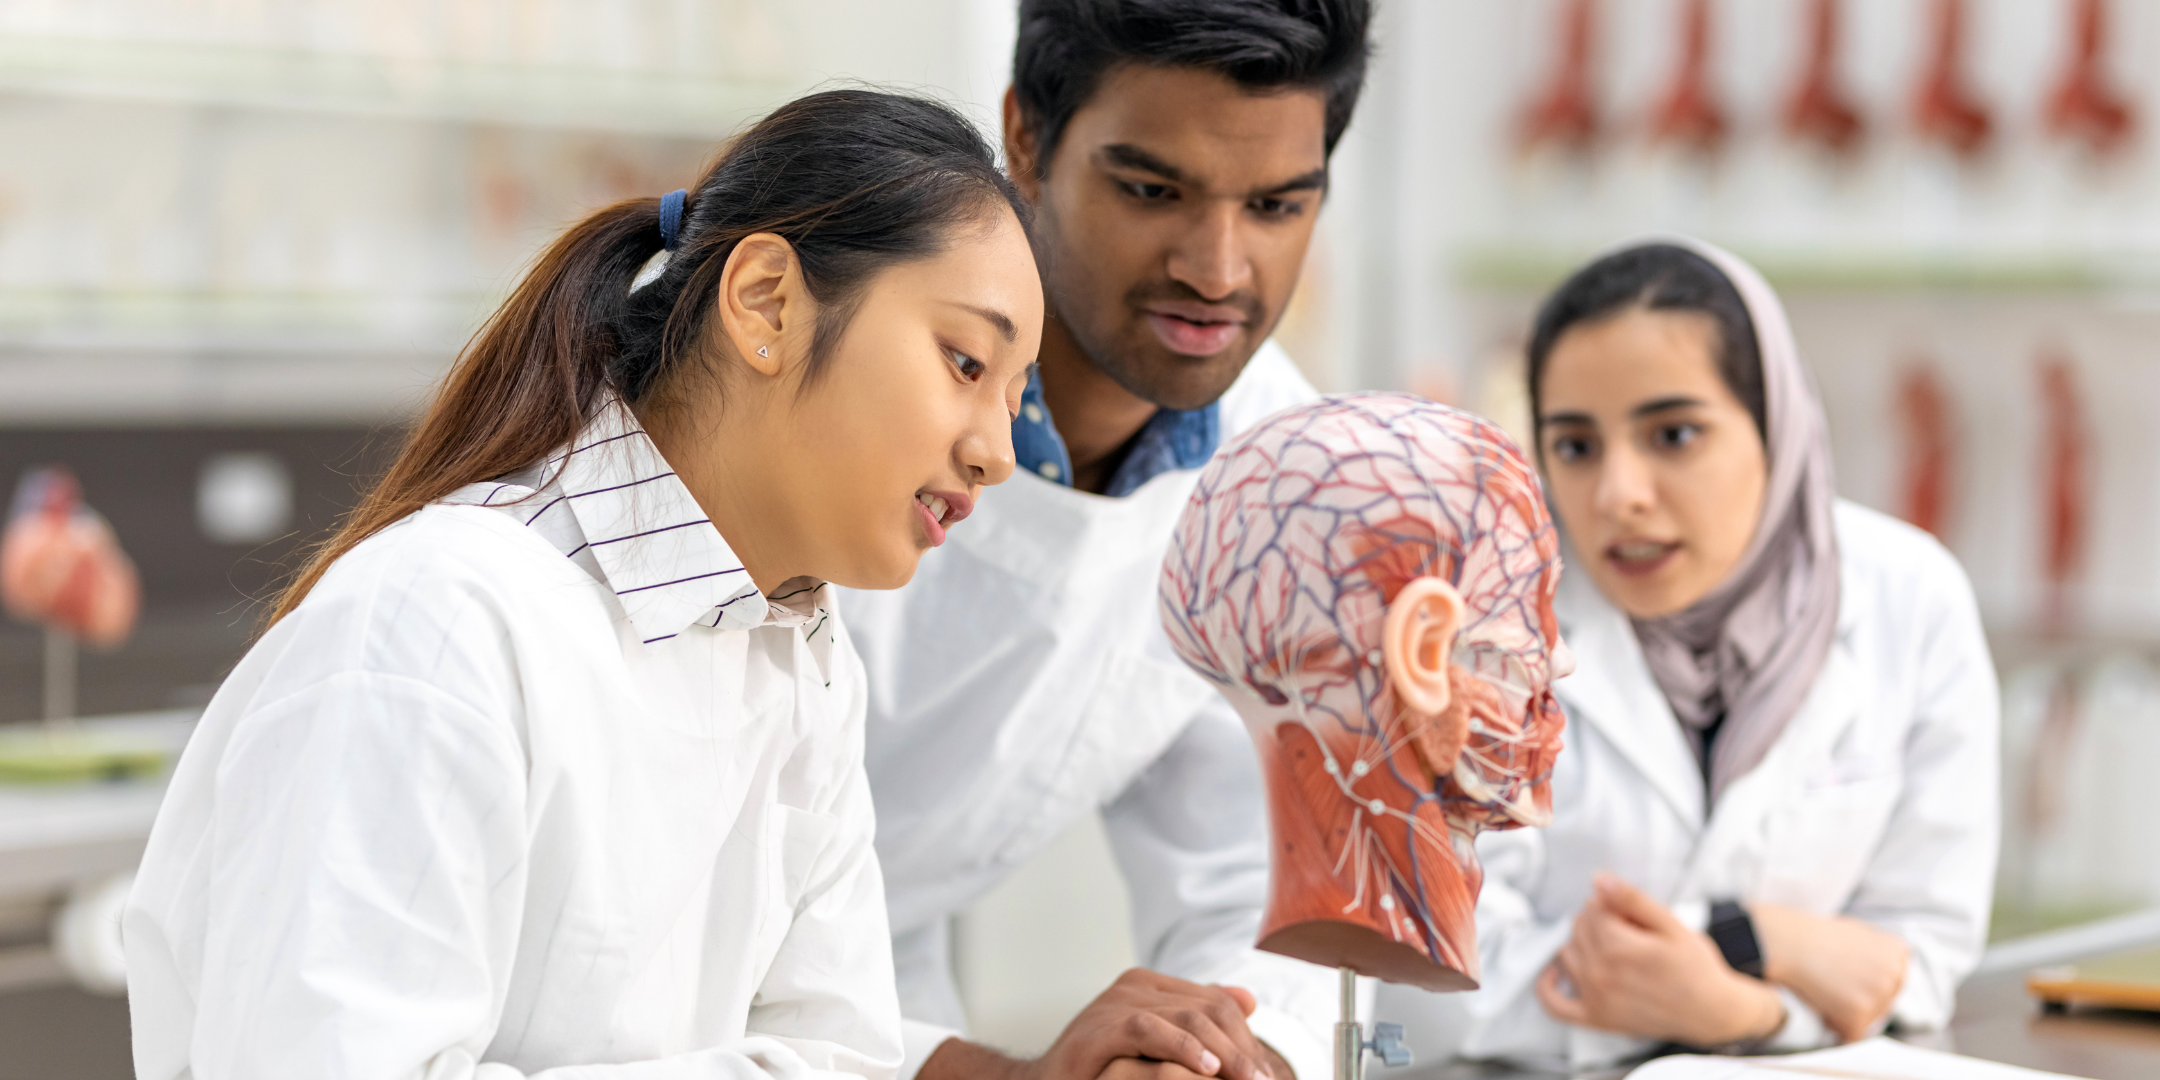 Female student studying medical anatomy in university lab using anatomical tool of human head